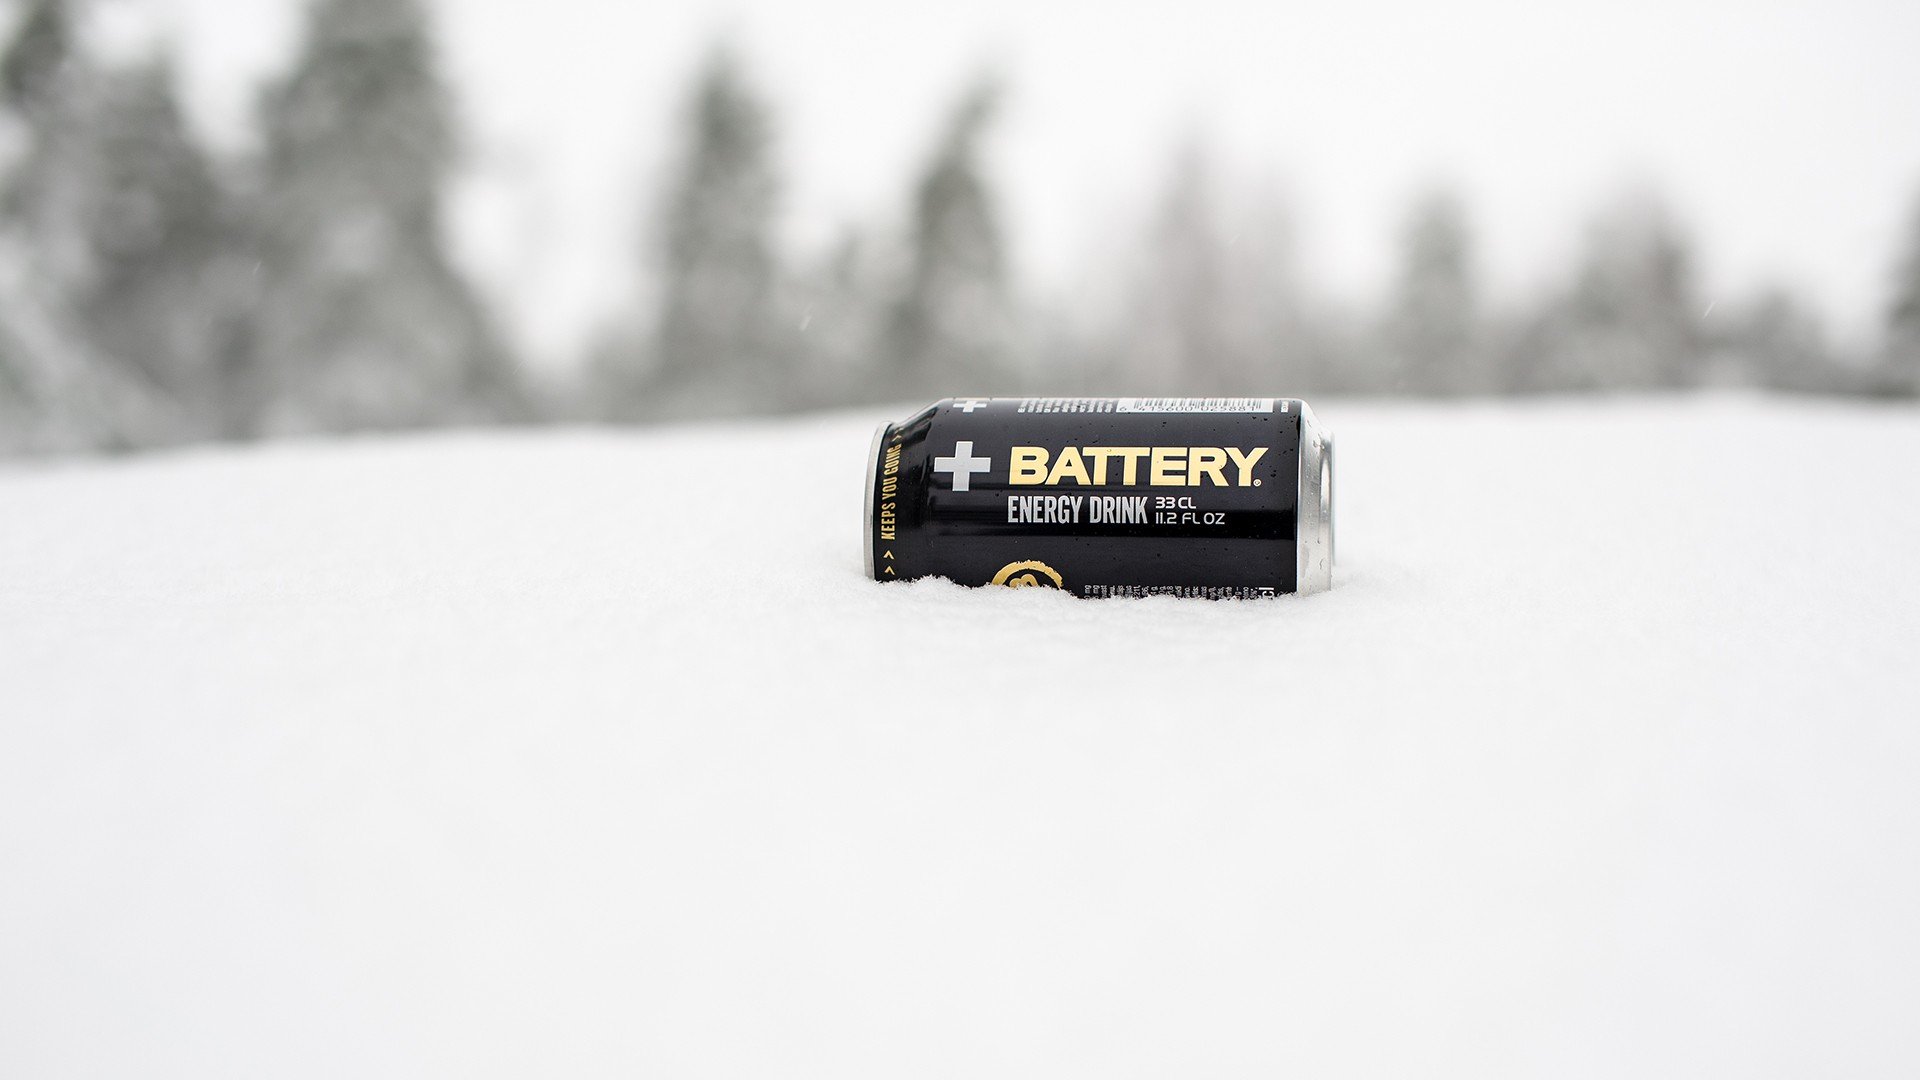 battery, Can, Snow, Energy drinks Wallpaper